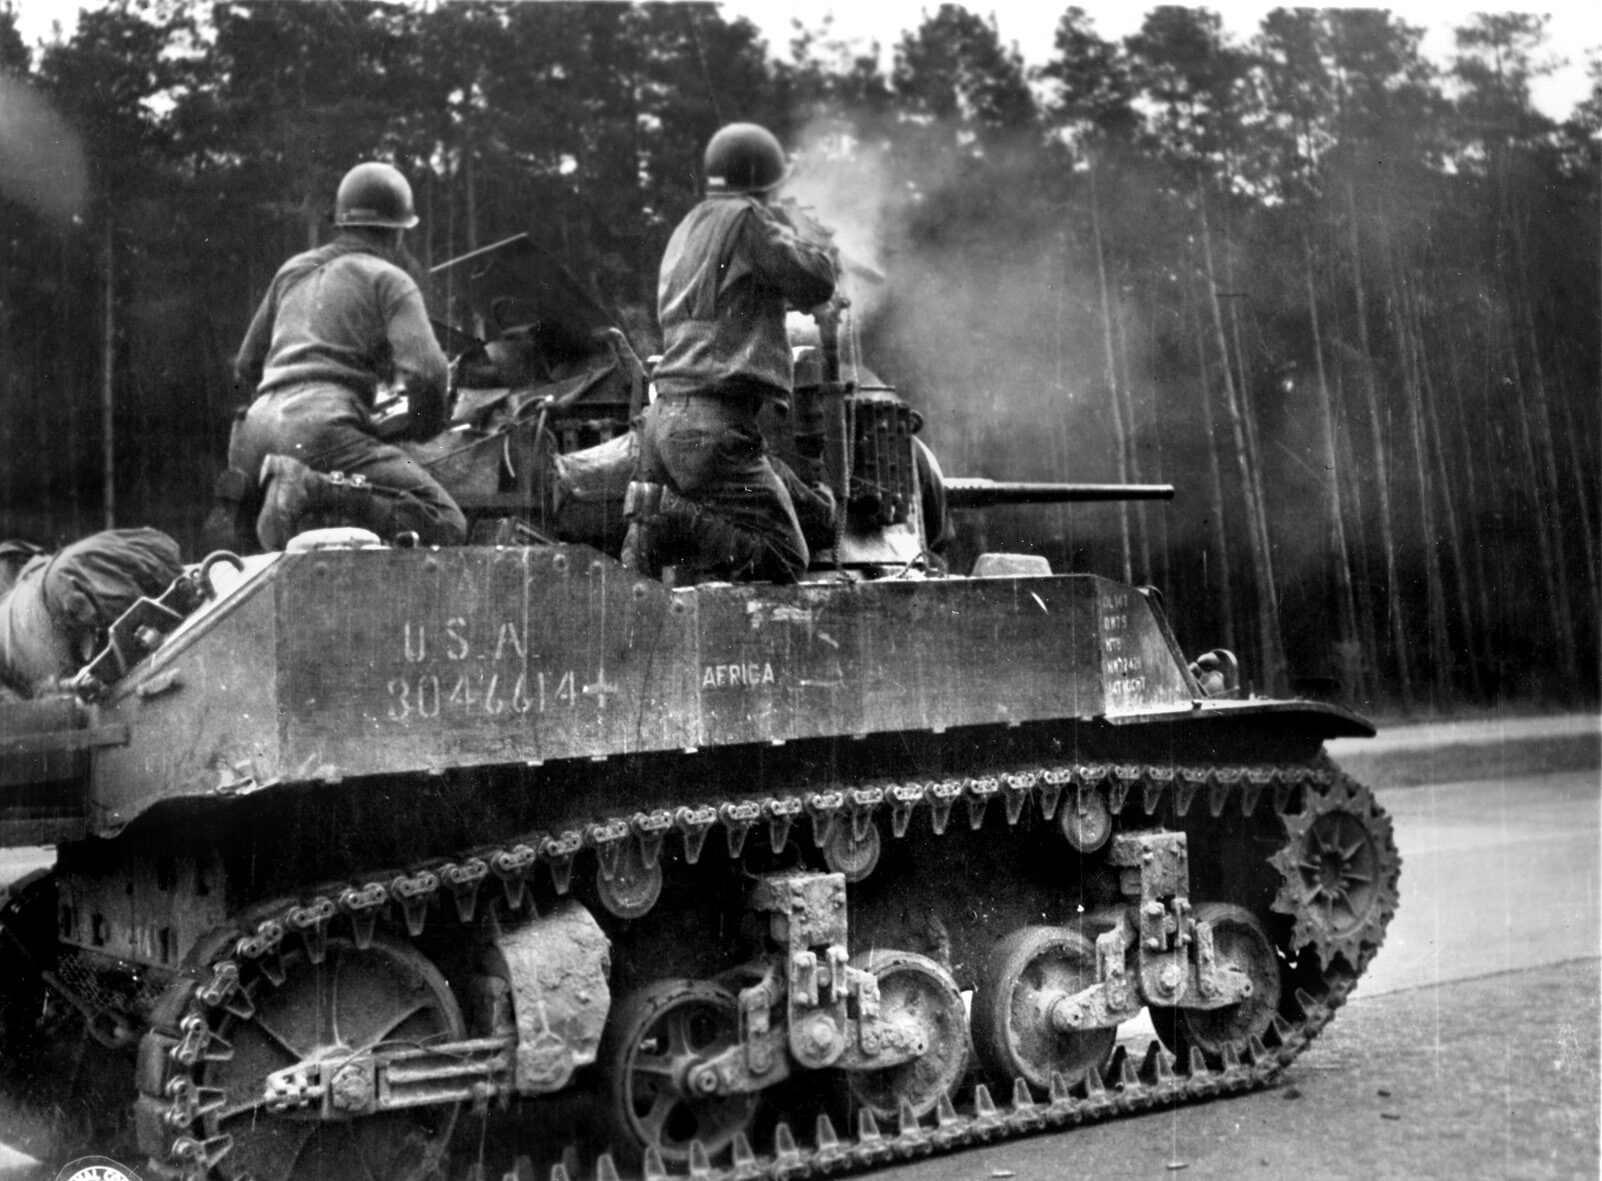 The crew of a Stuart tank fires on snipers in the woods near Dessau, Germany.